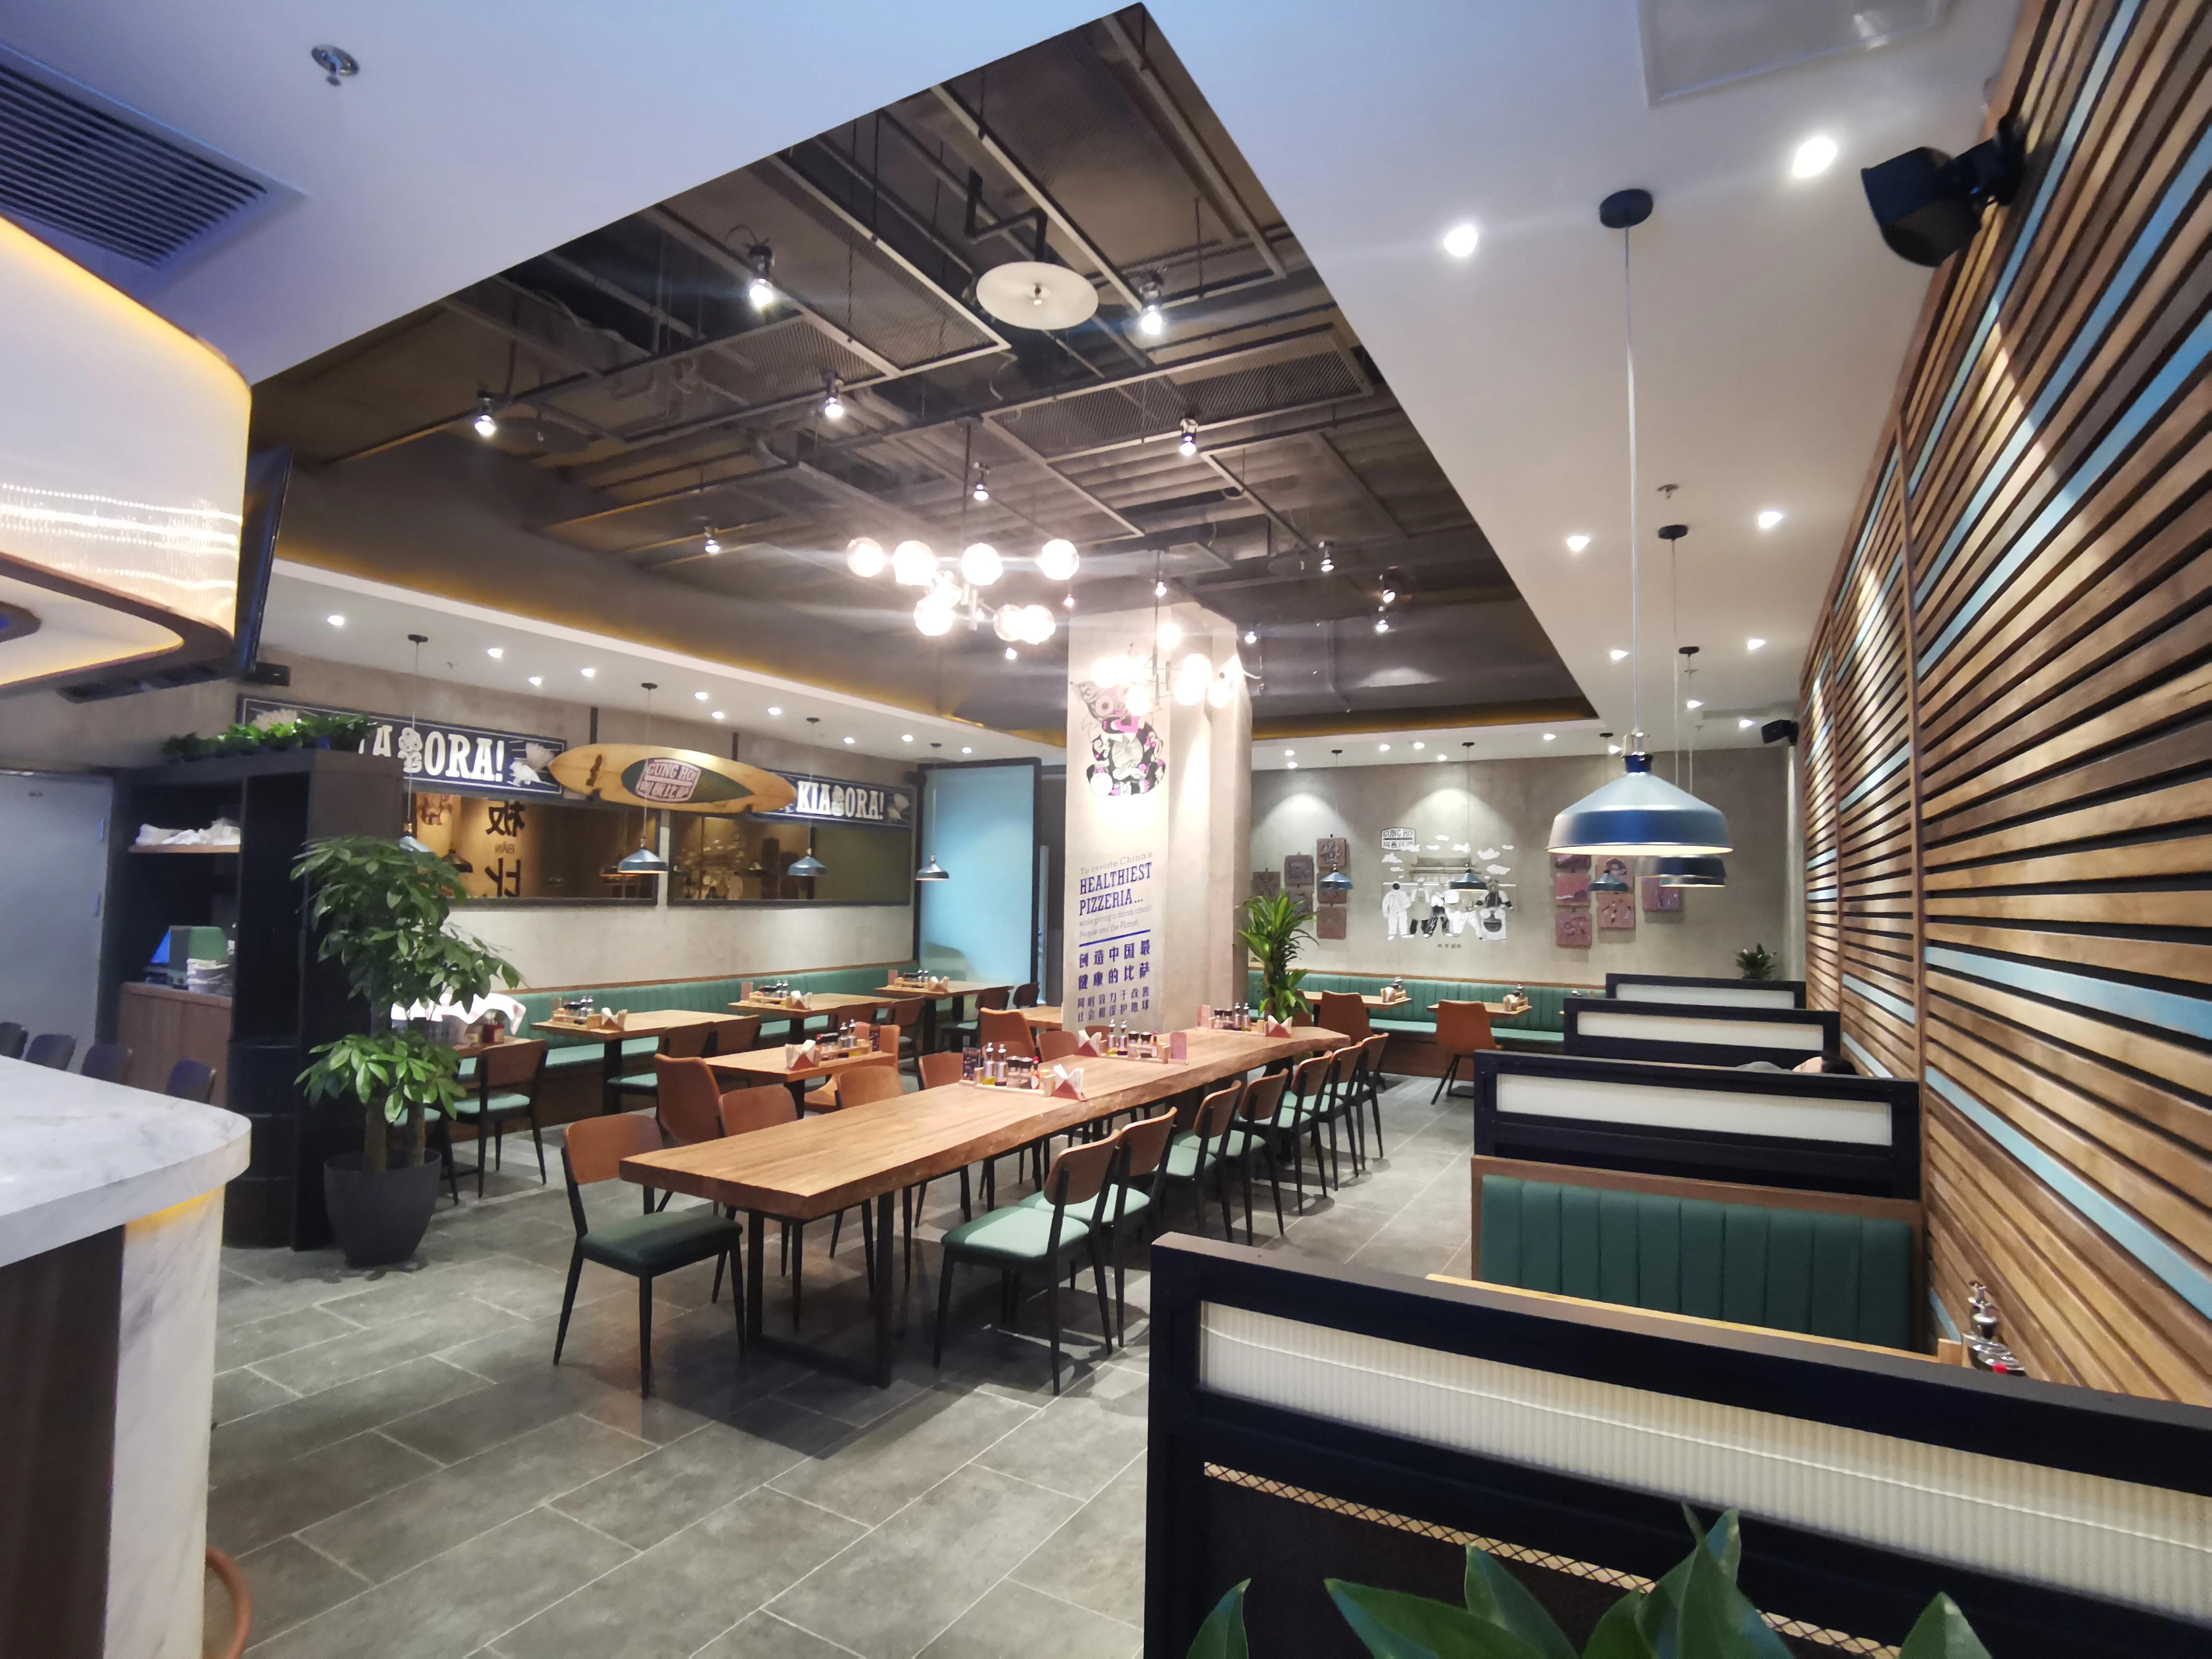 Gung Ho! Gears Up to Sling Pizza at Brand New Sanyuanqiao Venue